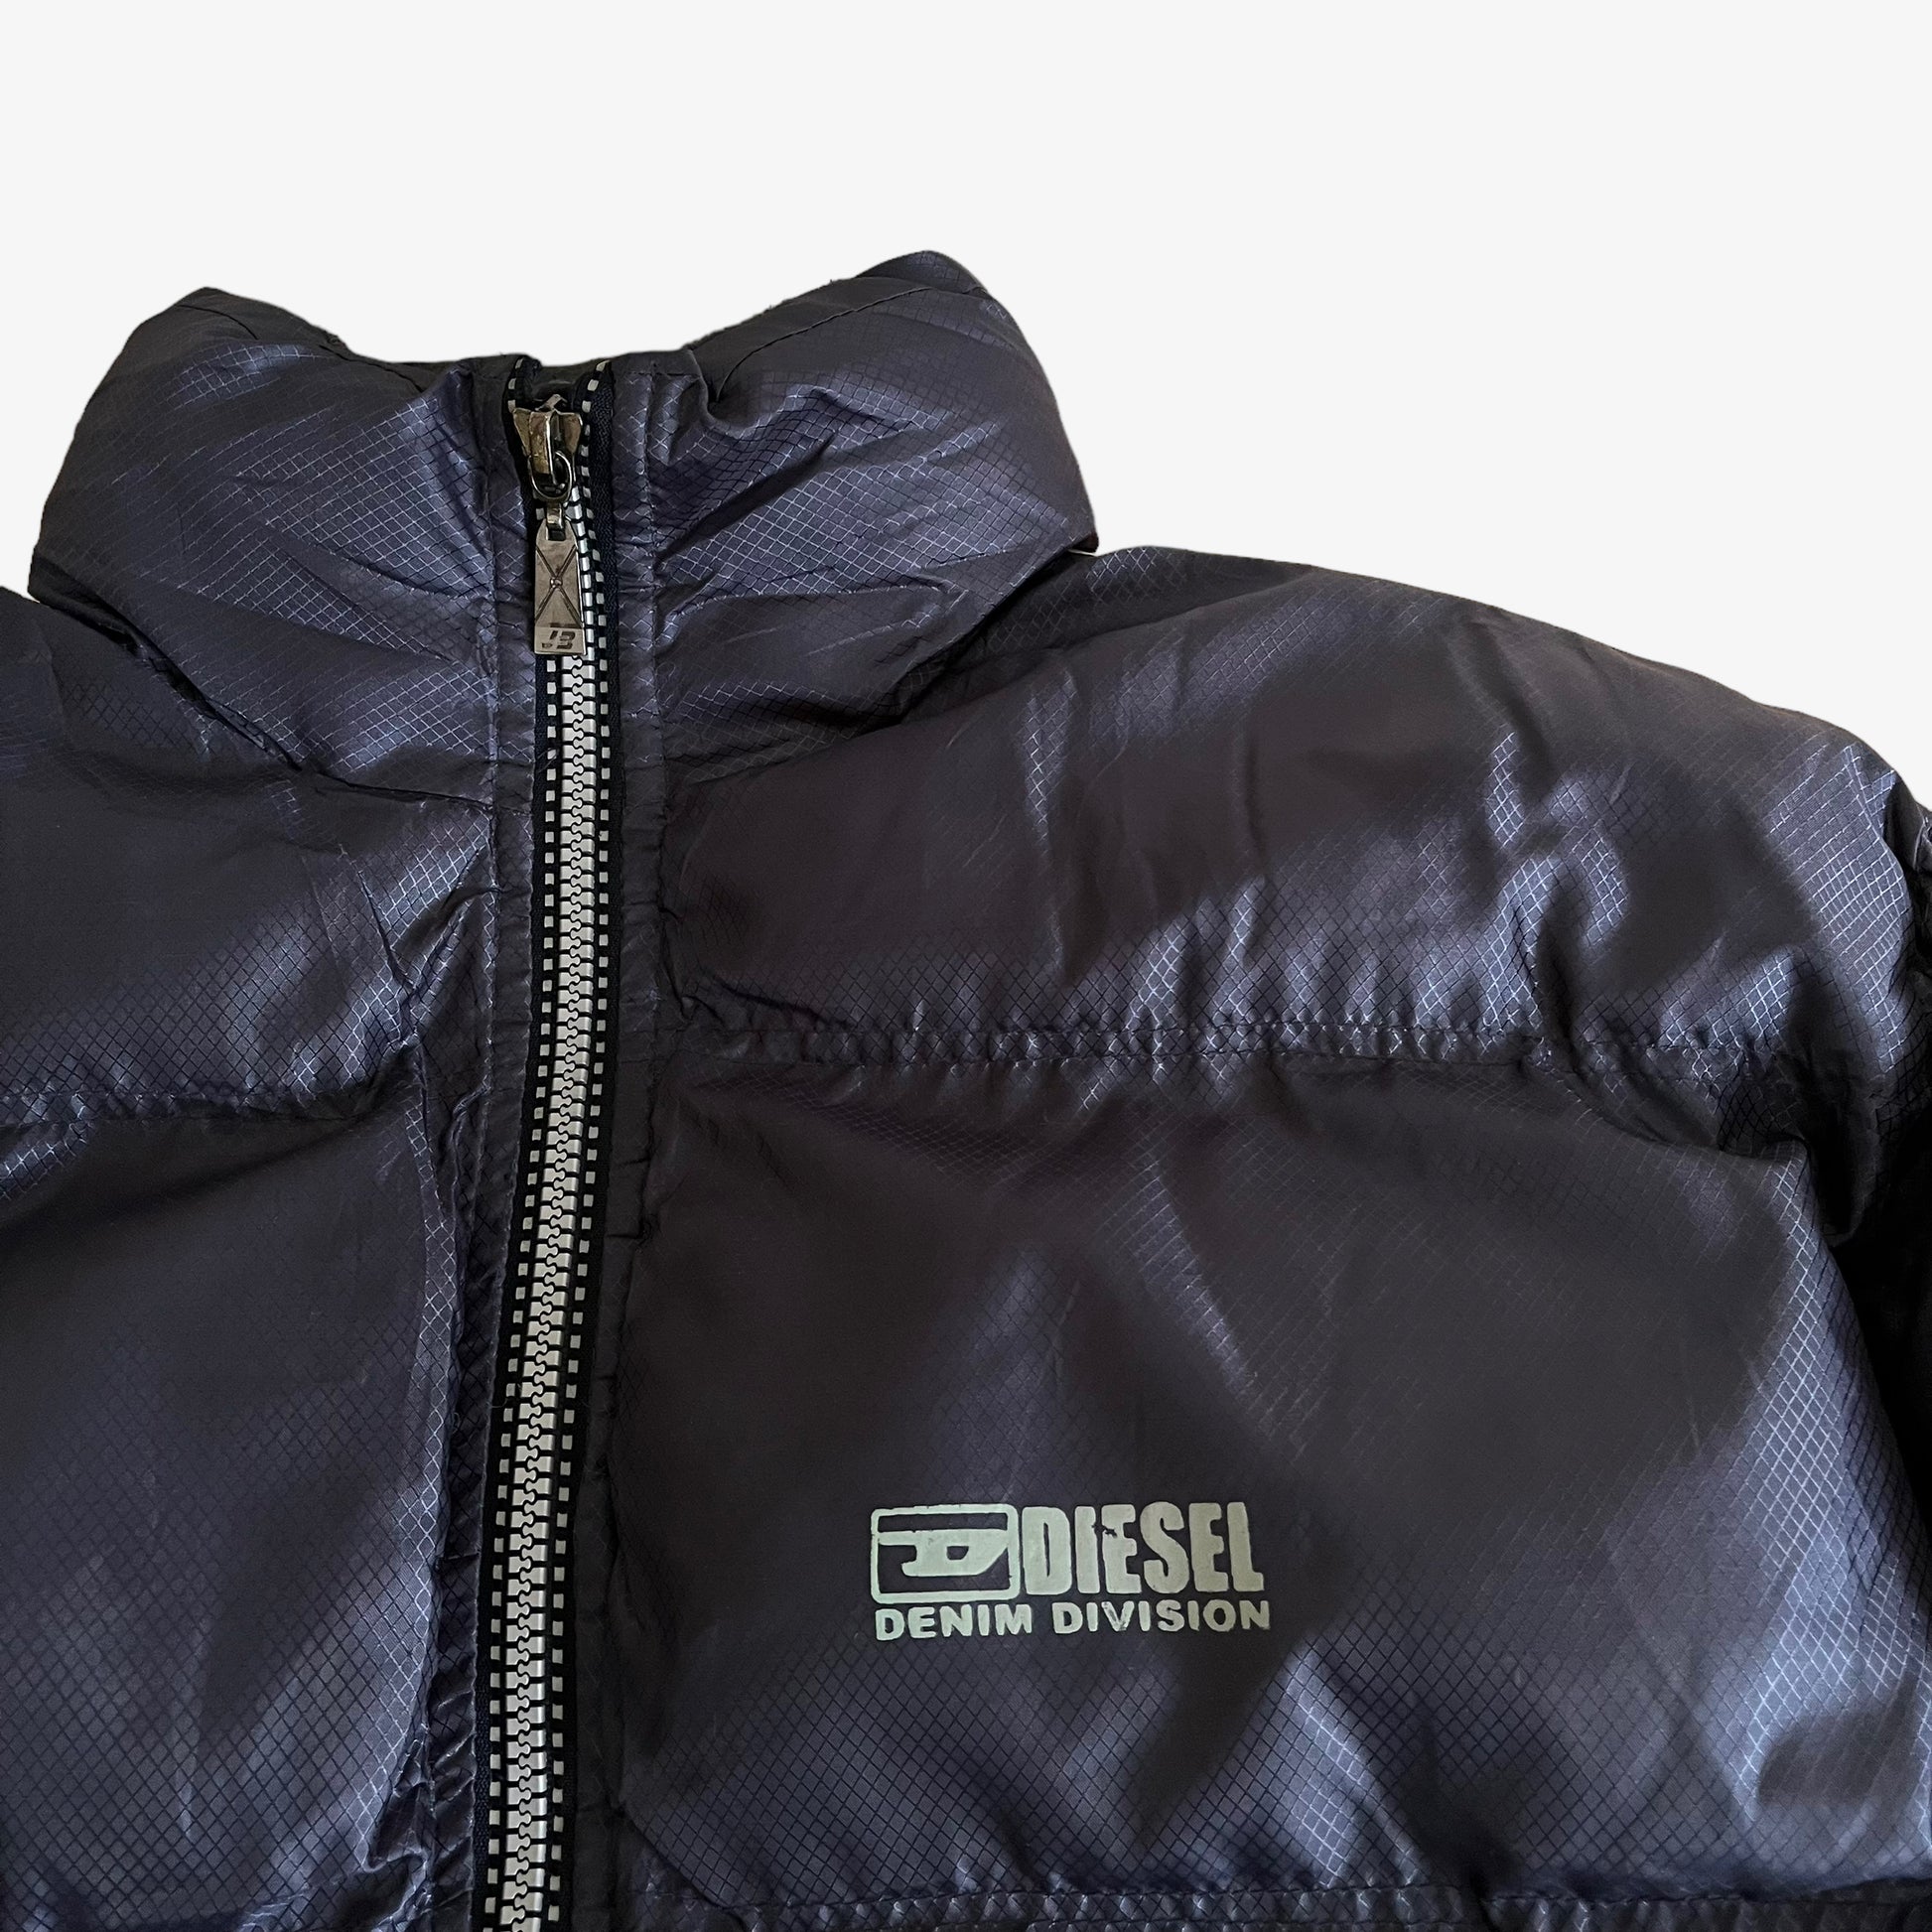 Vintage 90s Diesel Denim Division Puffer Jacket With Back Spell Out Logo - Casspios Dream